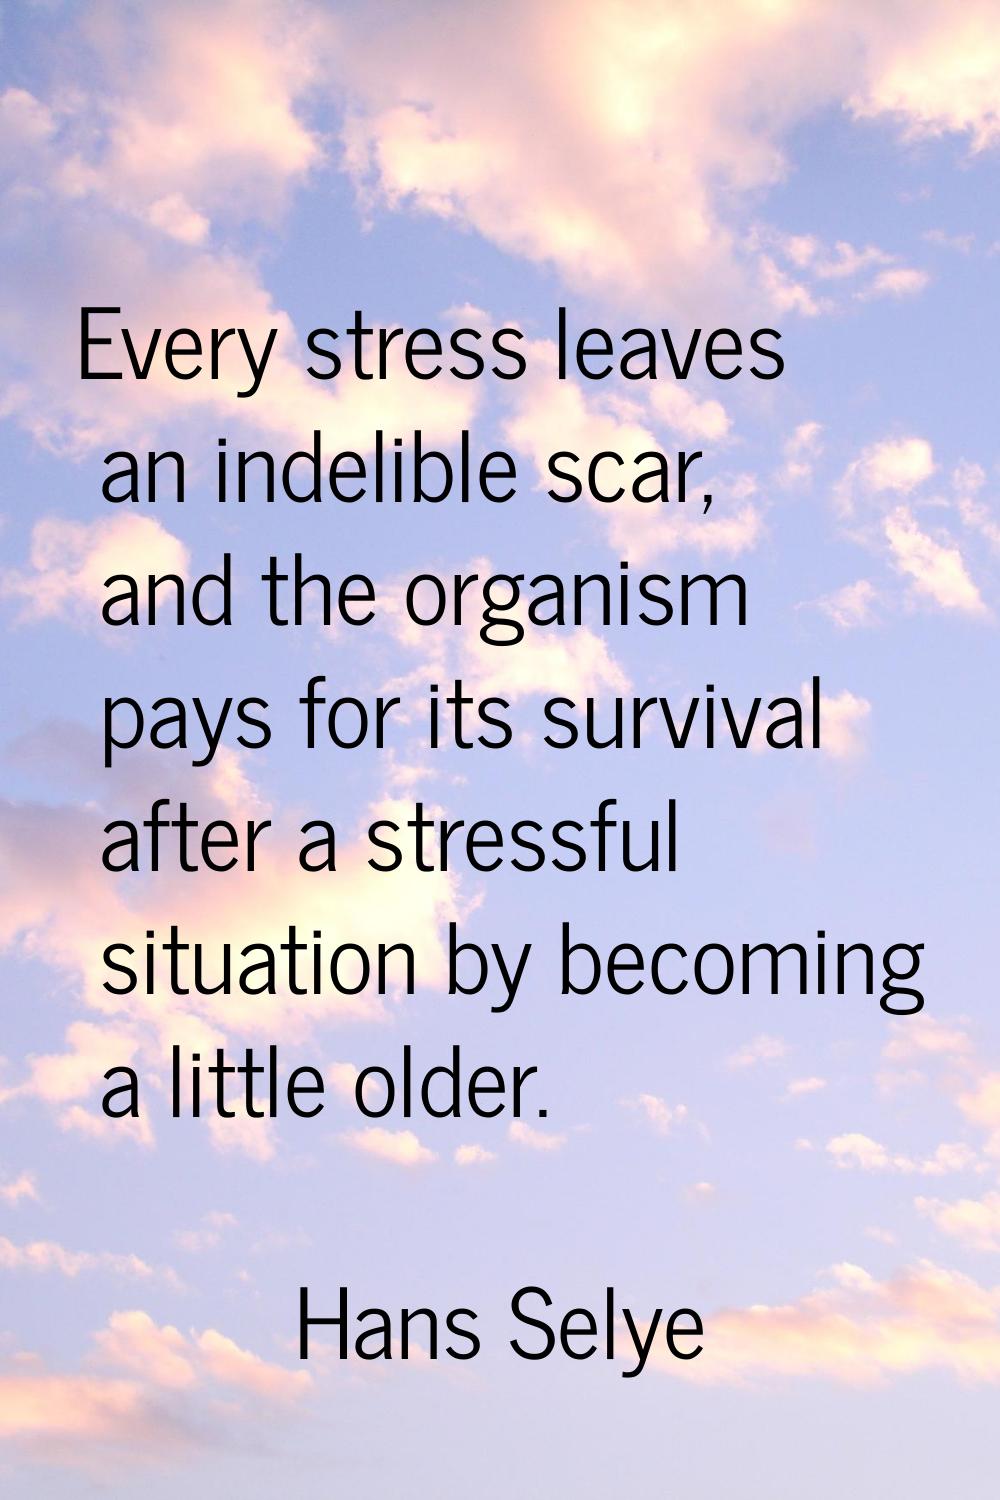 Every stress leaves an indelible scar, and the organism pays for its survival after a stressful sit